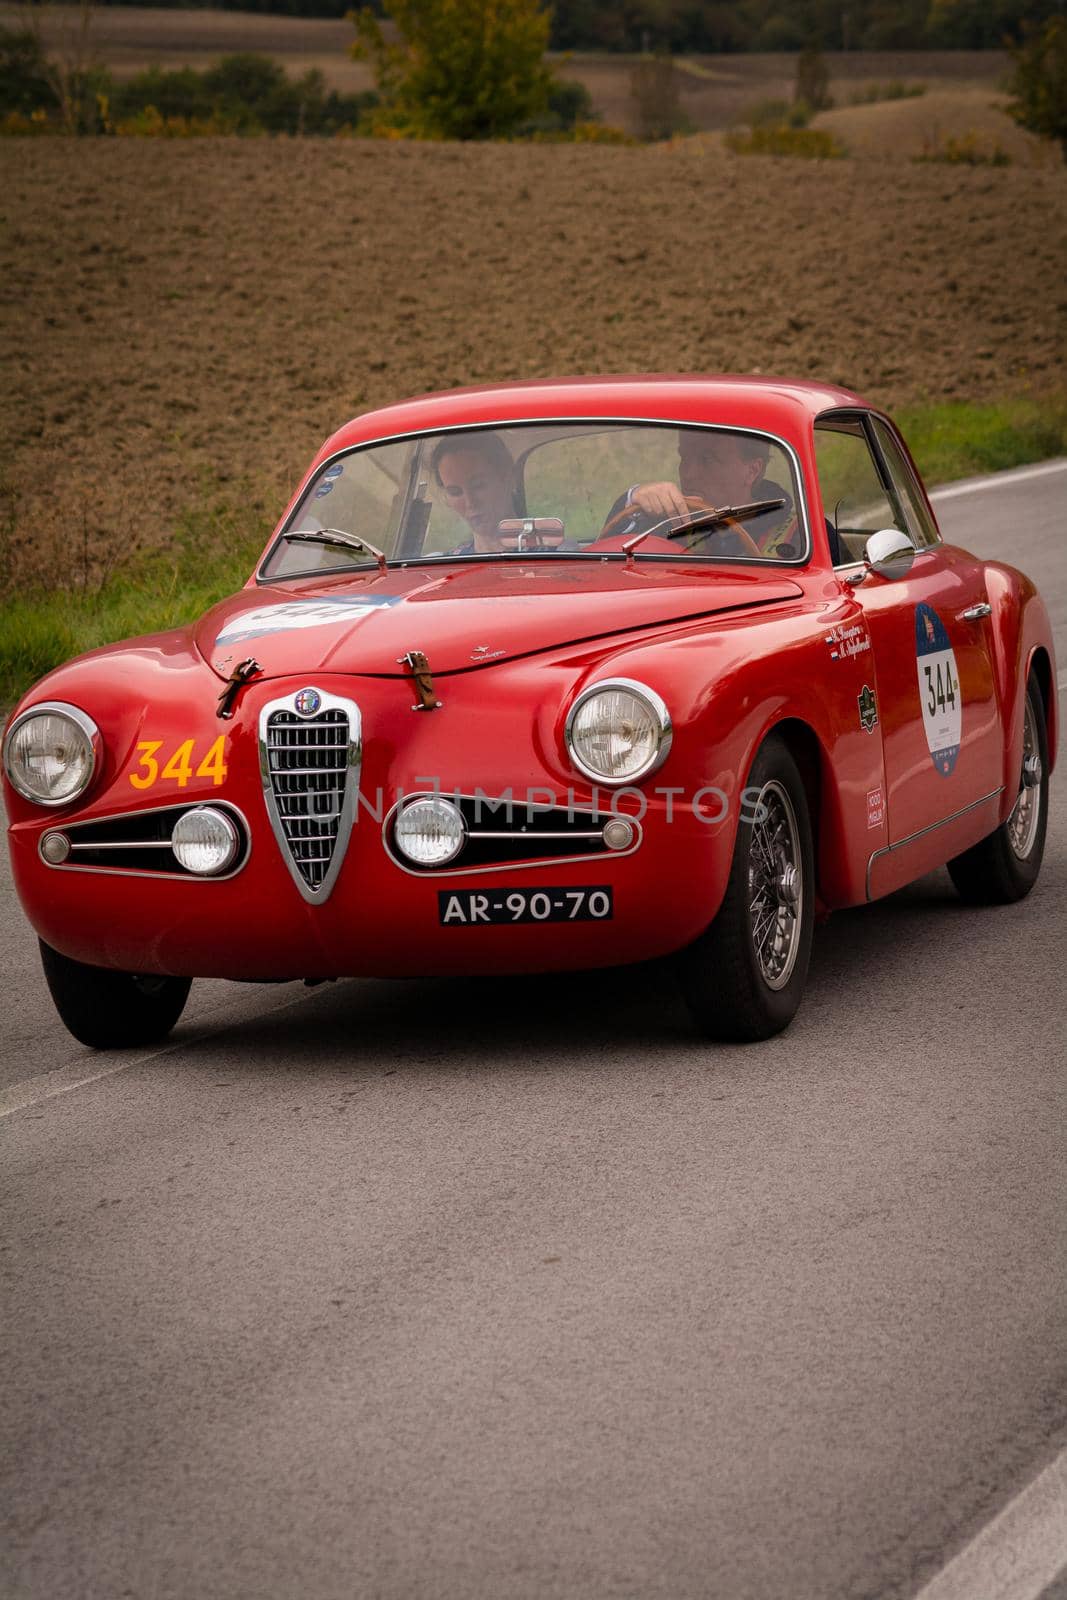 CAGLI , ITALY - OTT 24 - 2020 : ALFA ROMEO 1900 C SUPER SPRINT TOURING 1955 on an old racing car in rally Mille Miglia 2020 the famous italian historical race (1927-1957)